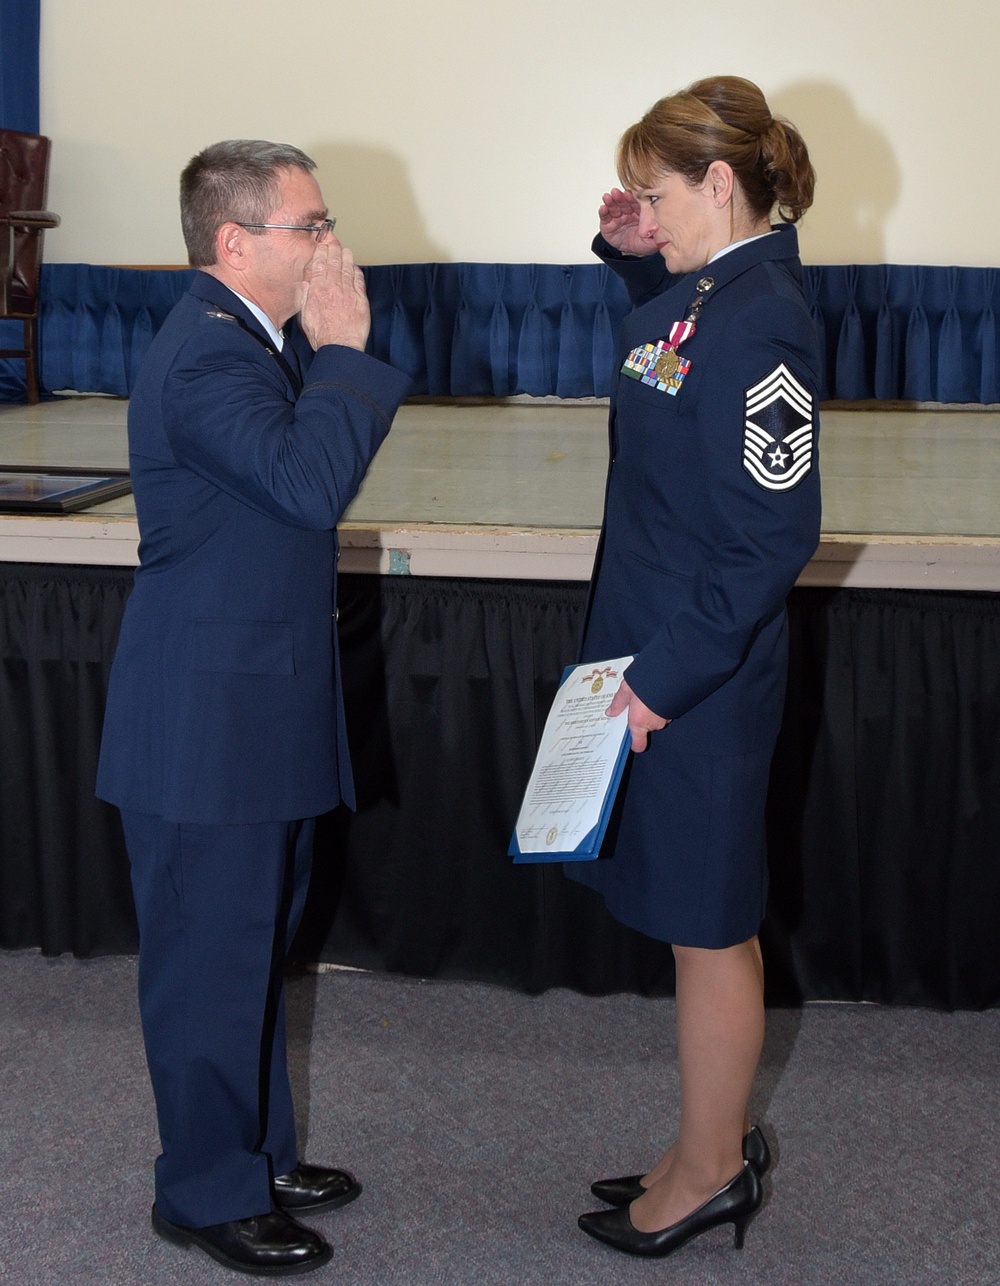 Horsham Air Guard Station says farewell to chief master sergeant